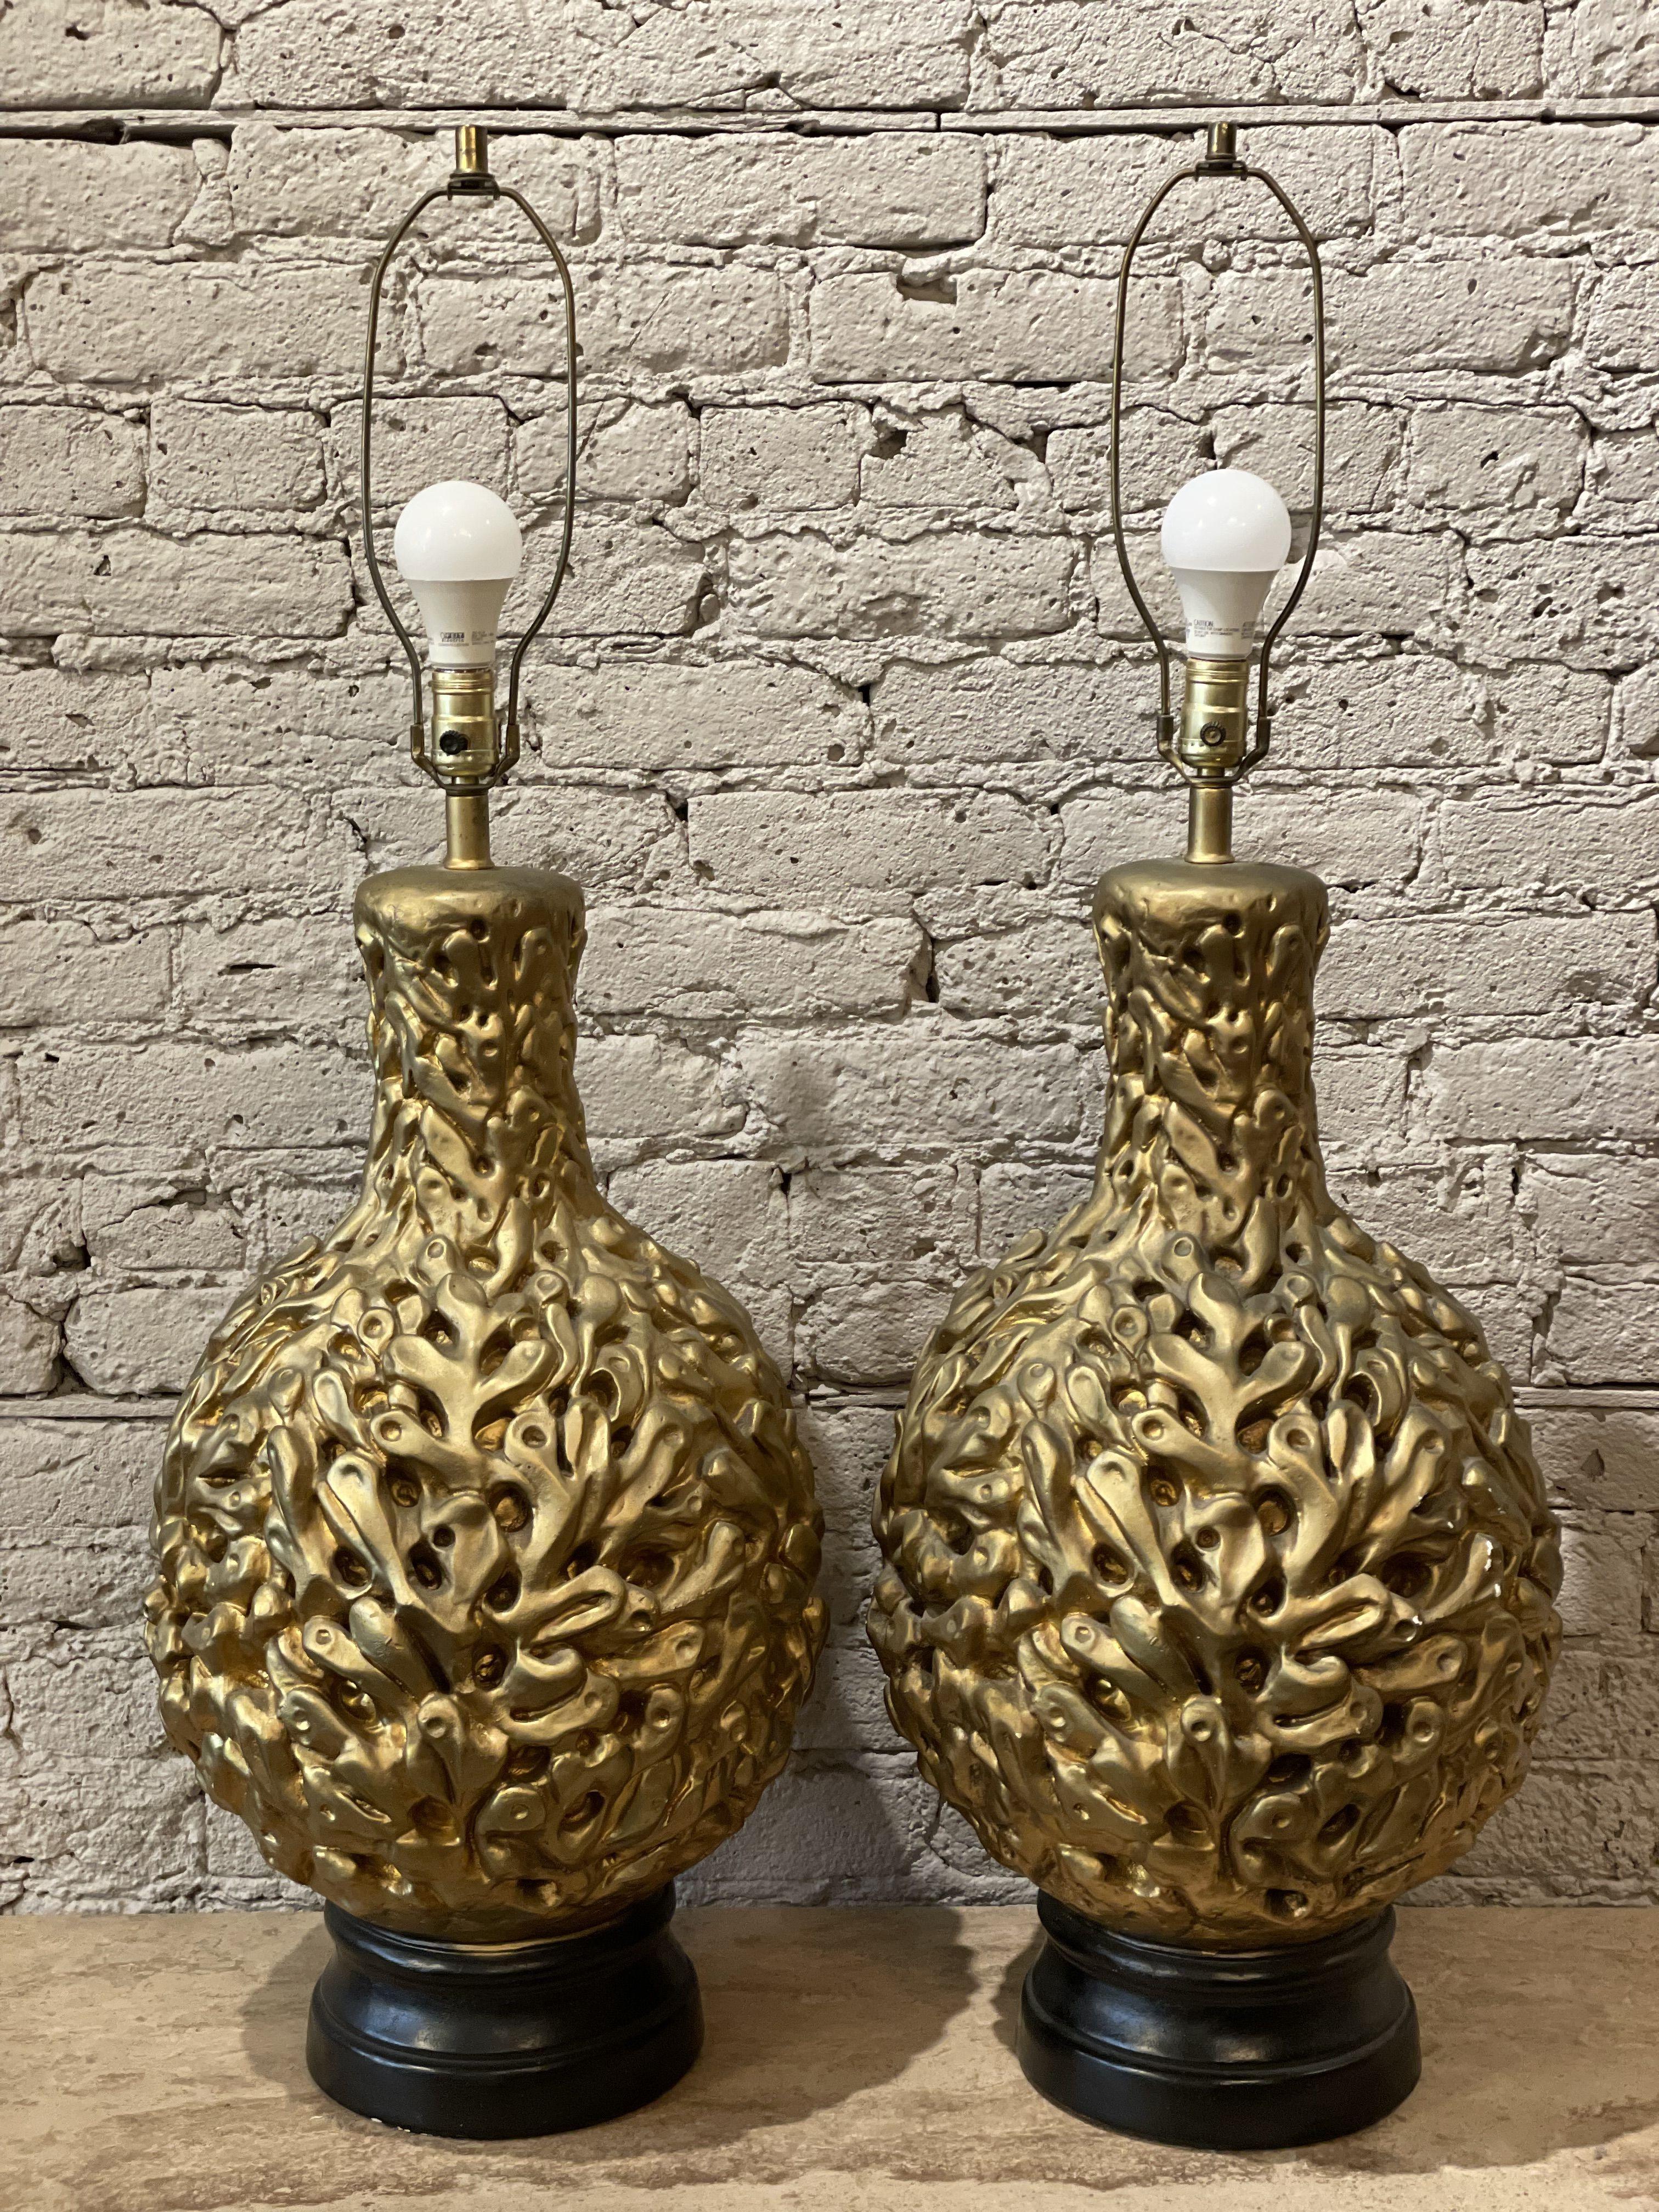 Super fun lamps! Statement piece to say the least. The intricate movement made of plaster and hand painted gold catches the light to add even more interest. Gorgeous!
The height is 27” to the top of socket and 40” to top of harp. 